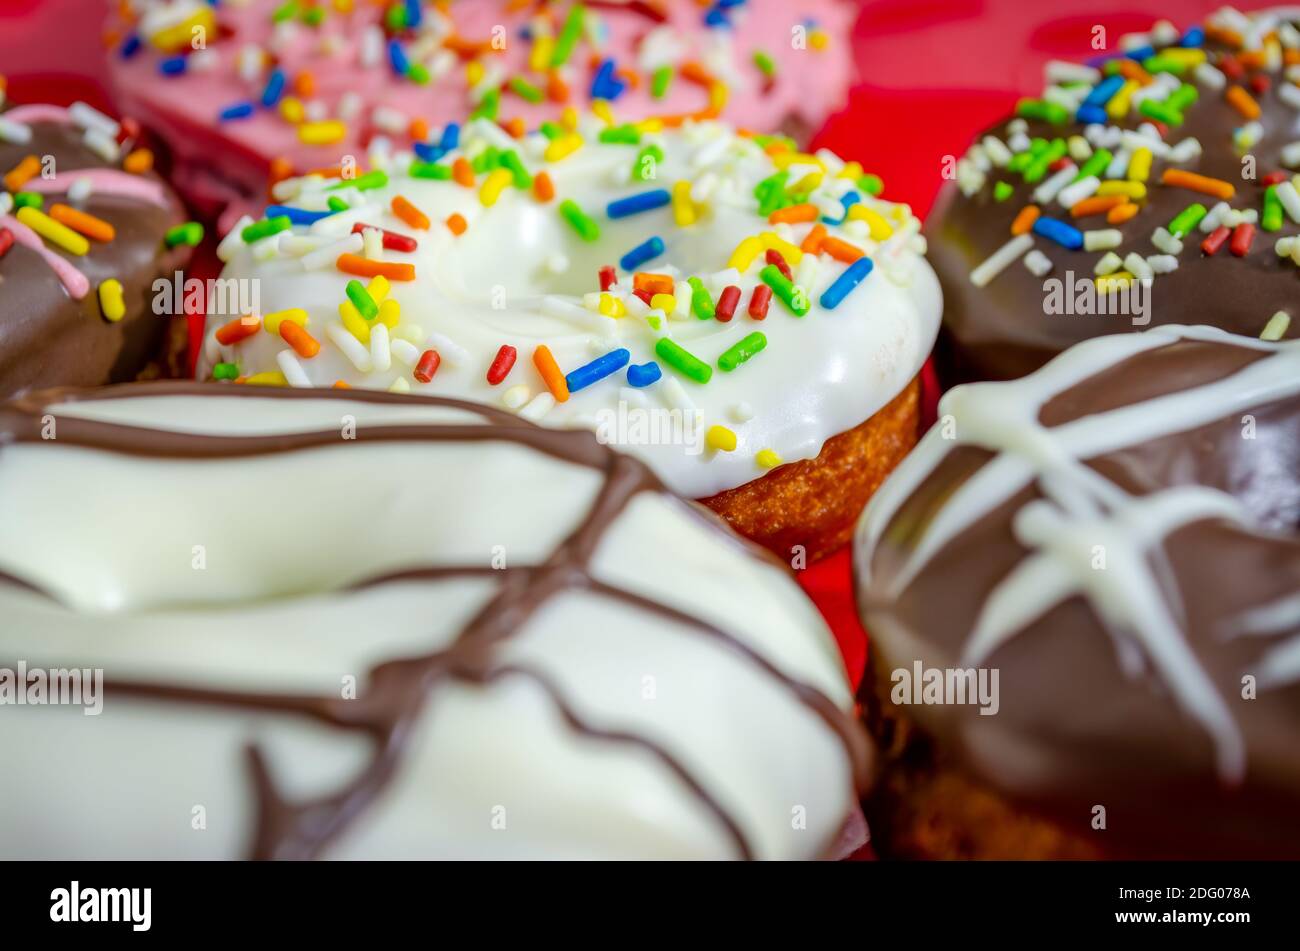 Closeup of various flavored donuts with colorful sugar strands sprinkled on them Stock Photo